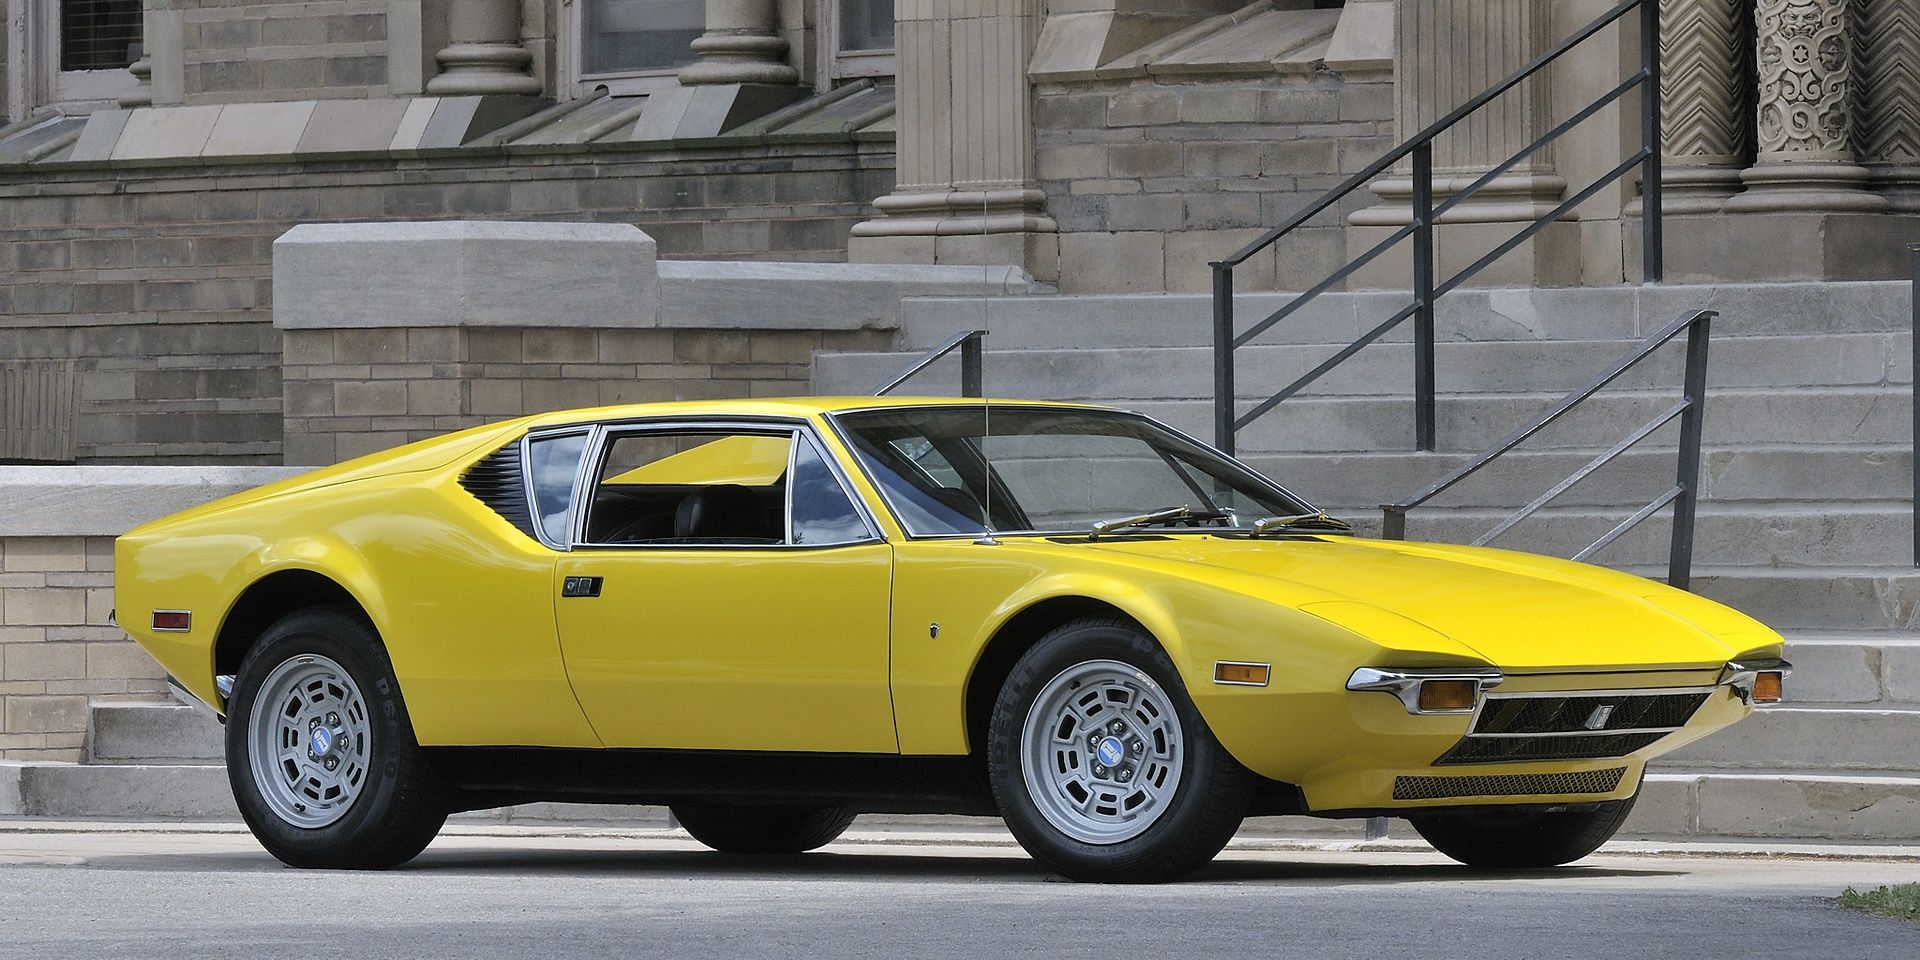 A Classic Yellow 1971 De Tomasso Pantera Parked In Front Of The Stairs Of A Building